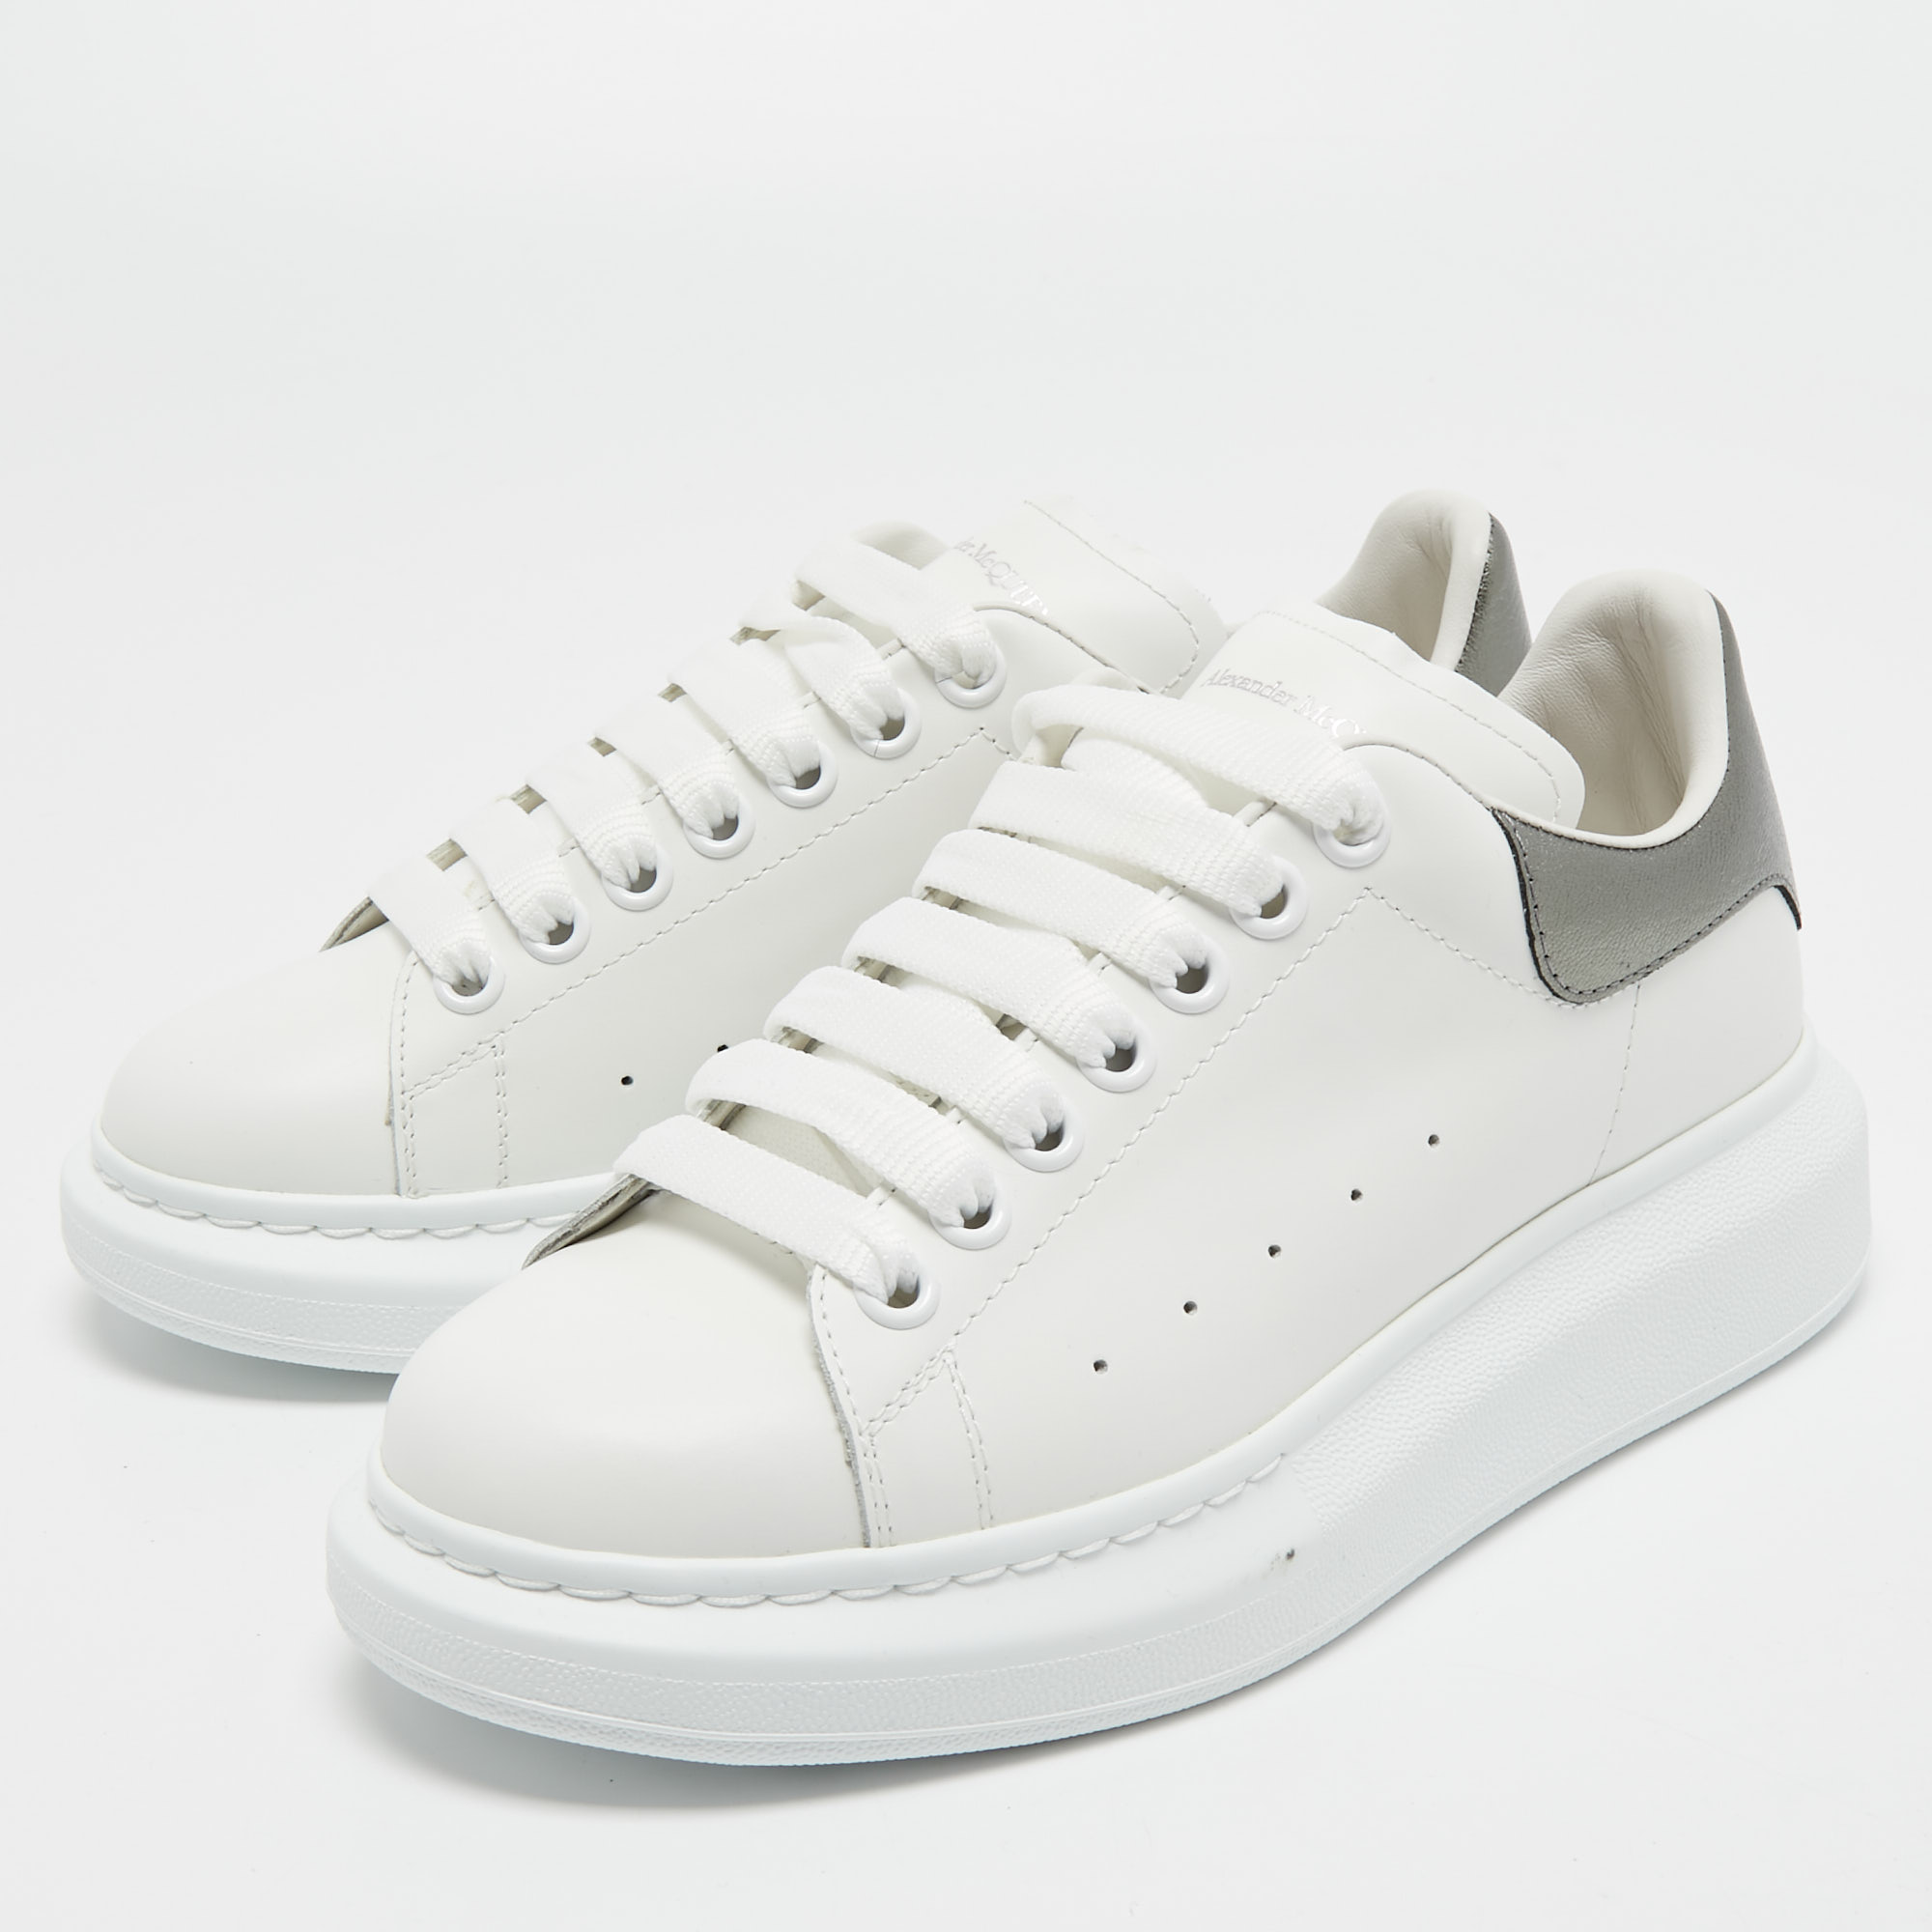 

Alexander McQueen White Leather Larry Low Top Sneakers Size